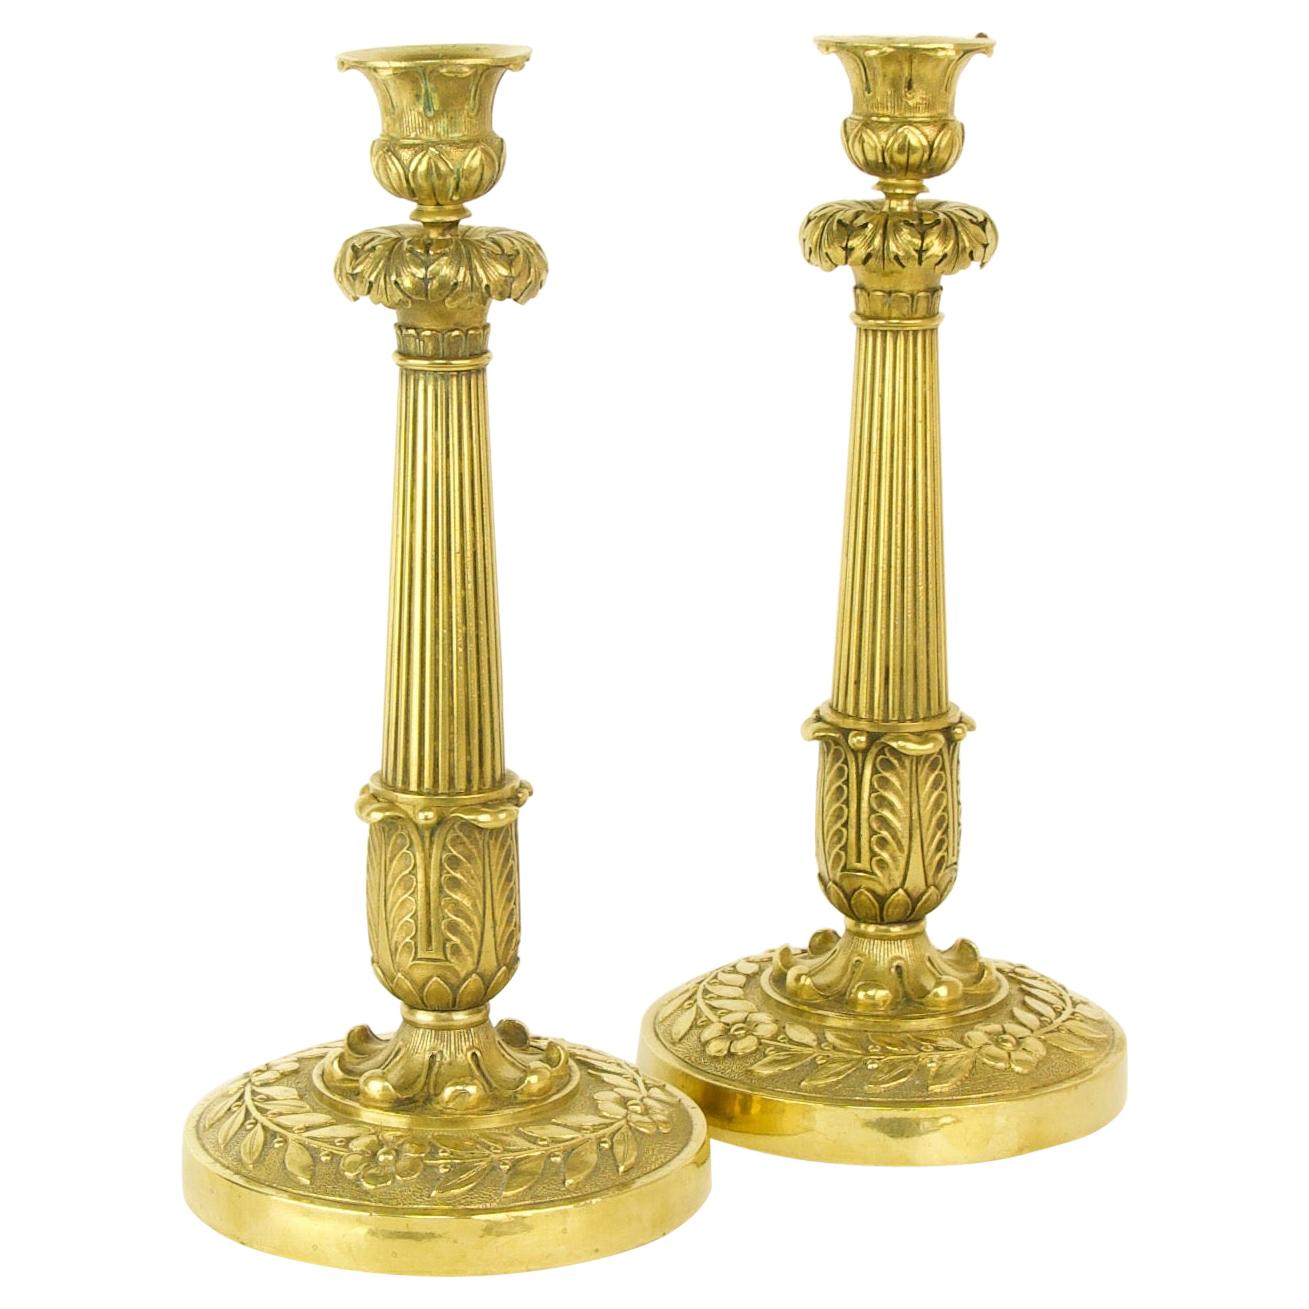 Pair of French Early 19th Century Empire Gilt-Bronze Candlesticks, circa 1820